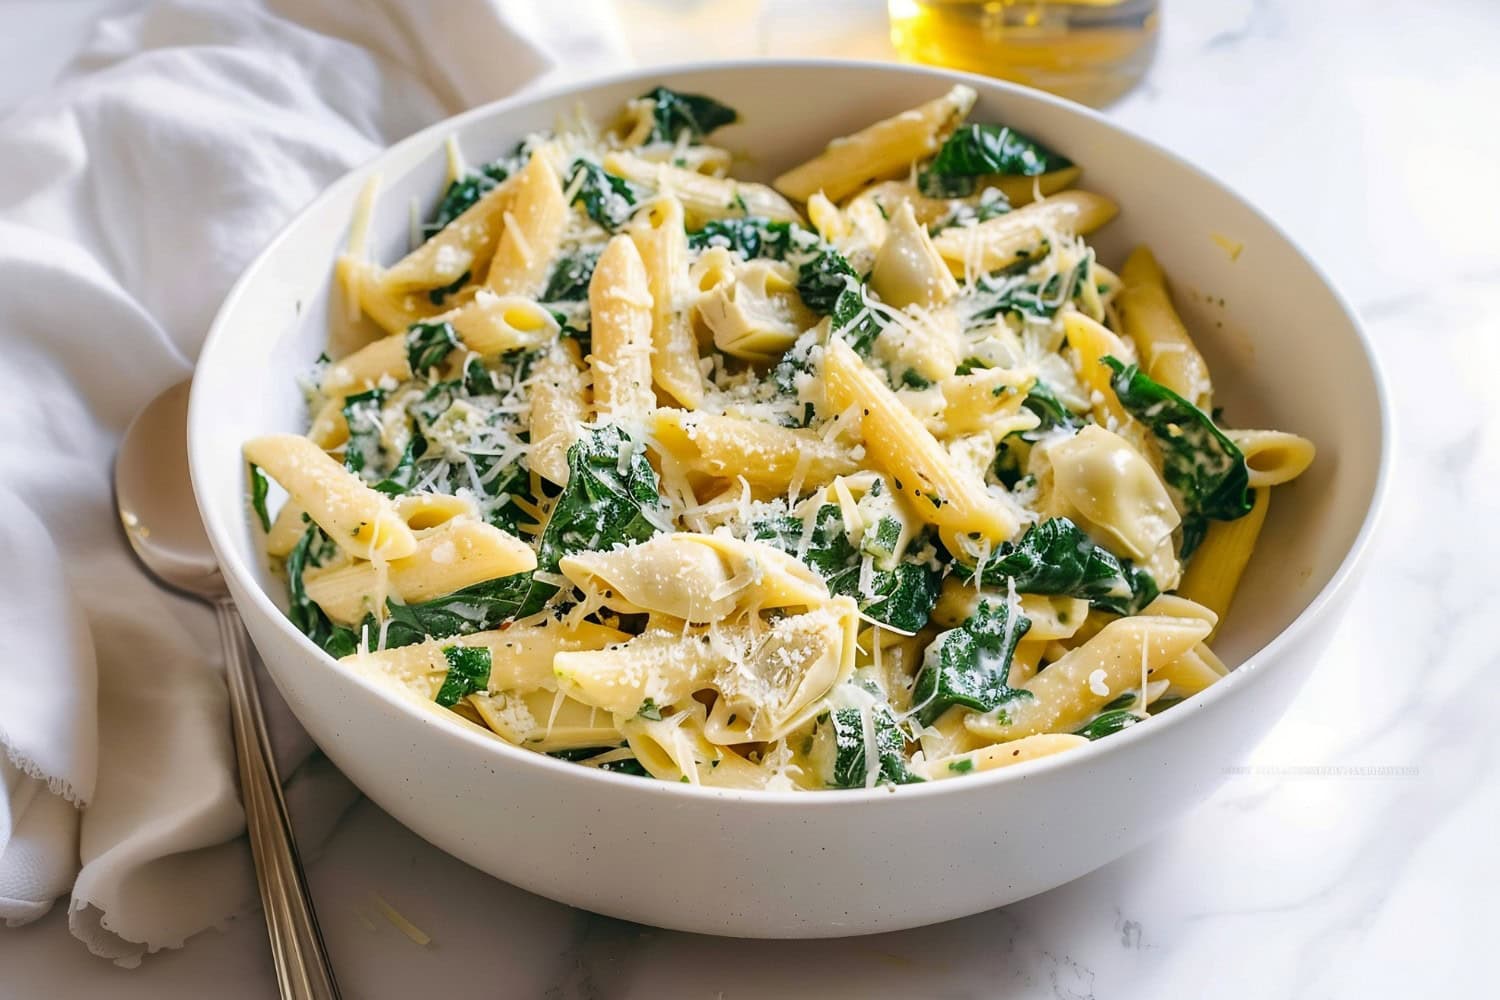 Spinach and artichoke with penne pasta and parmesan cheese in a white bowl